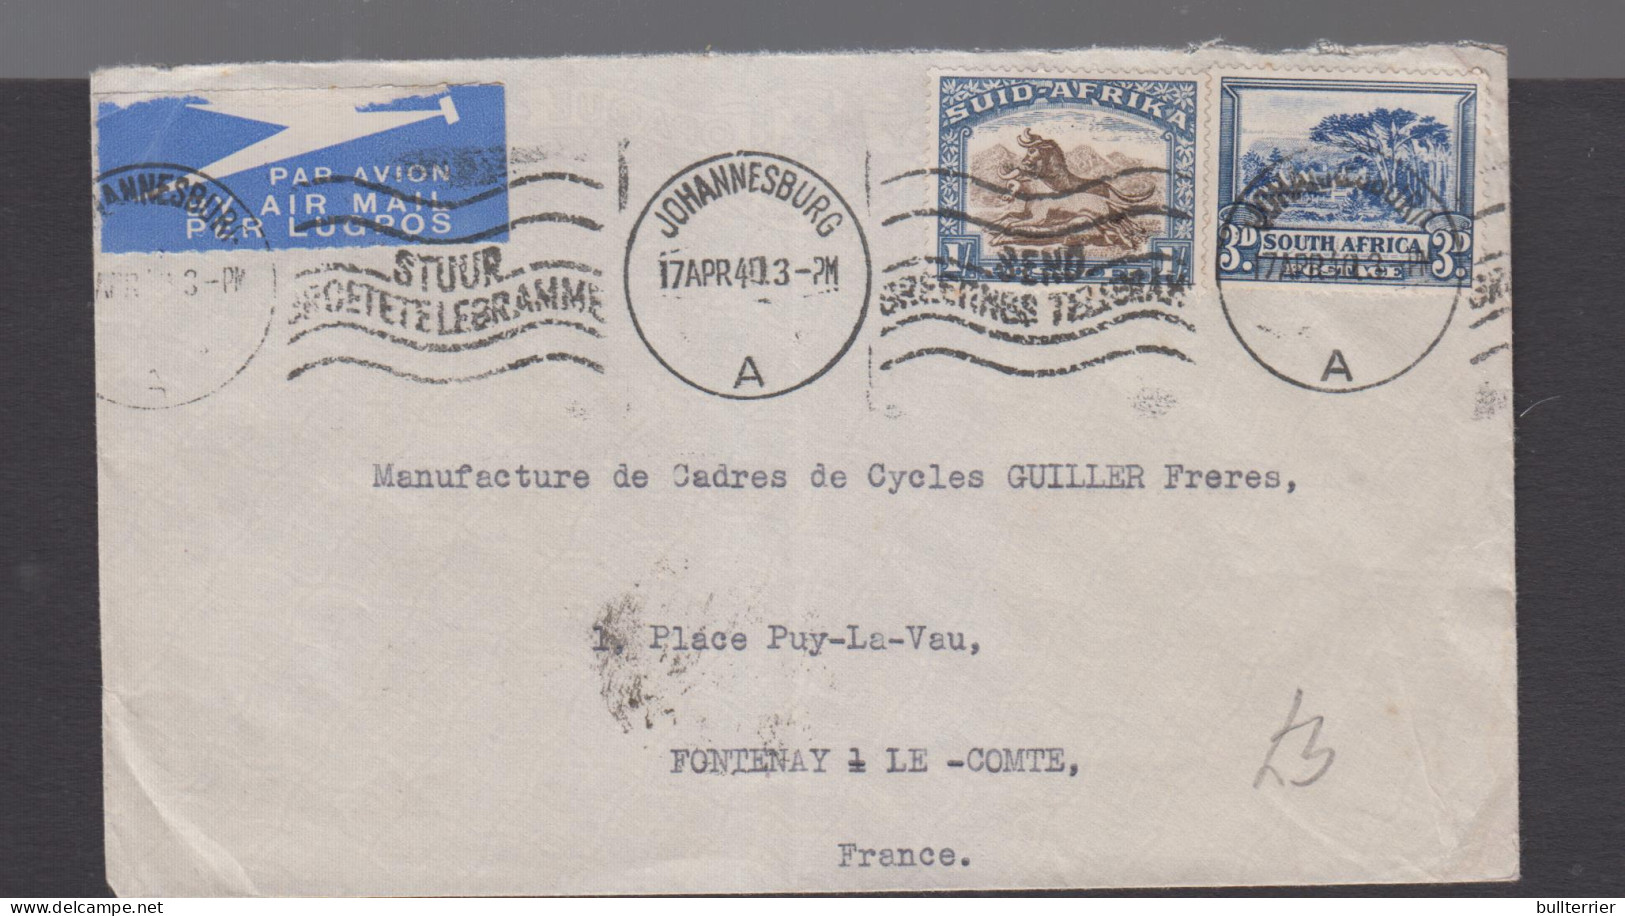 AIRMAILS - SOUTH AFRICA - 1940 - AIRMAIL COVER JO BURG TO FONTENAY LE COMTE  - Posta Aerea